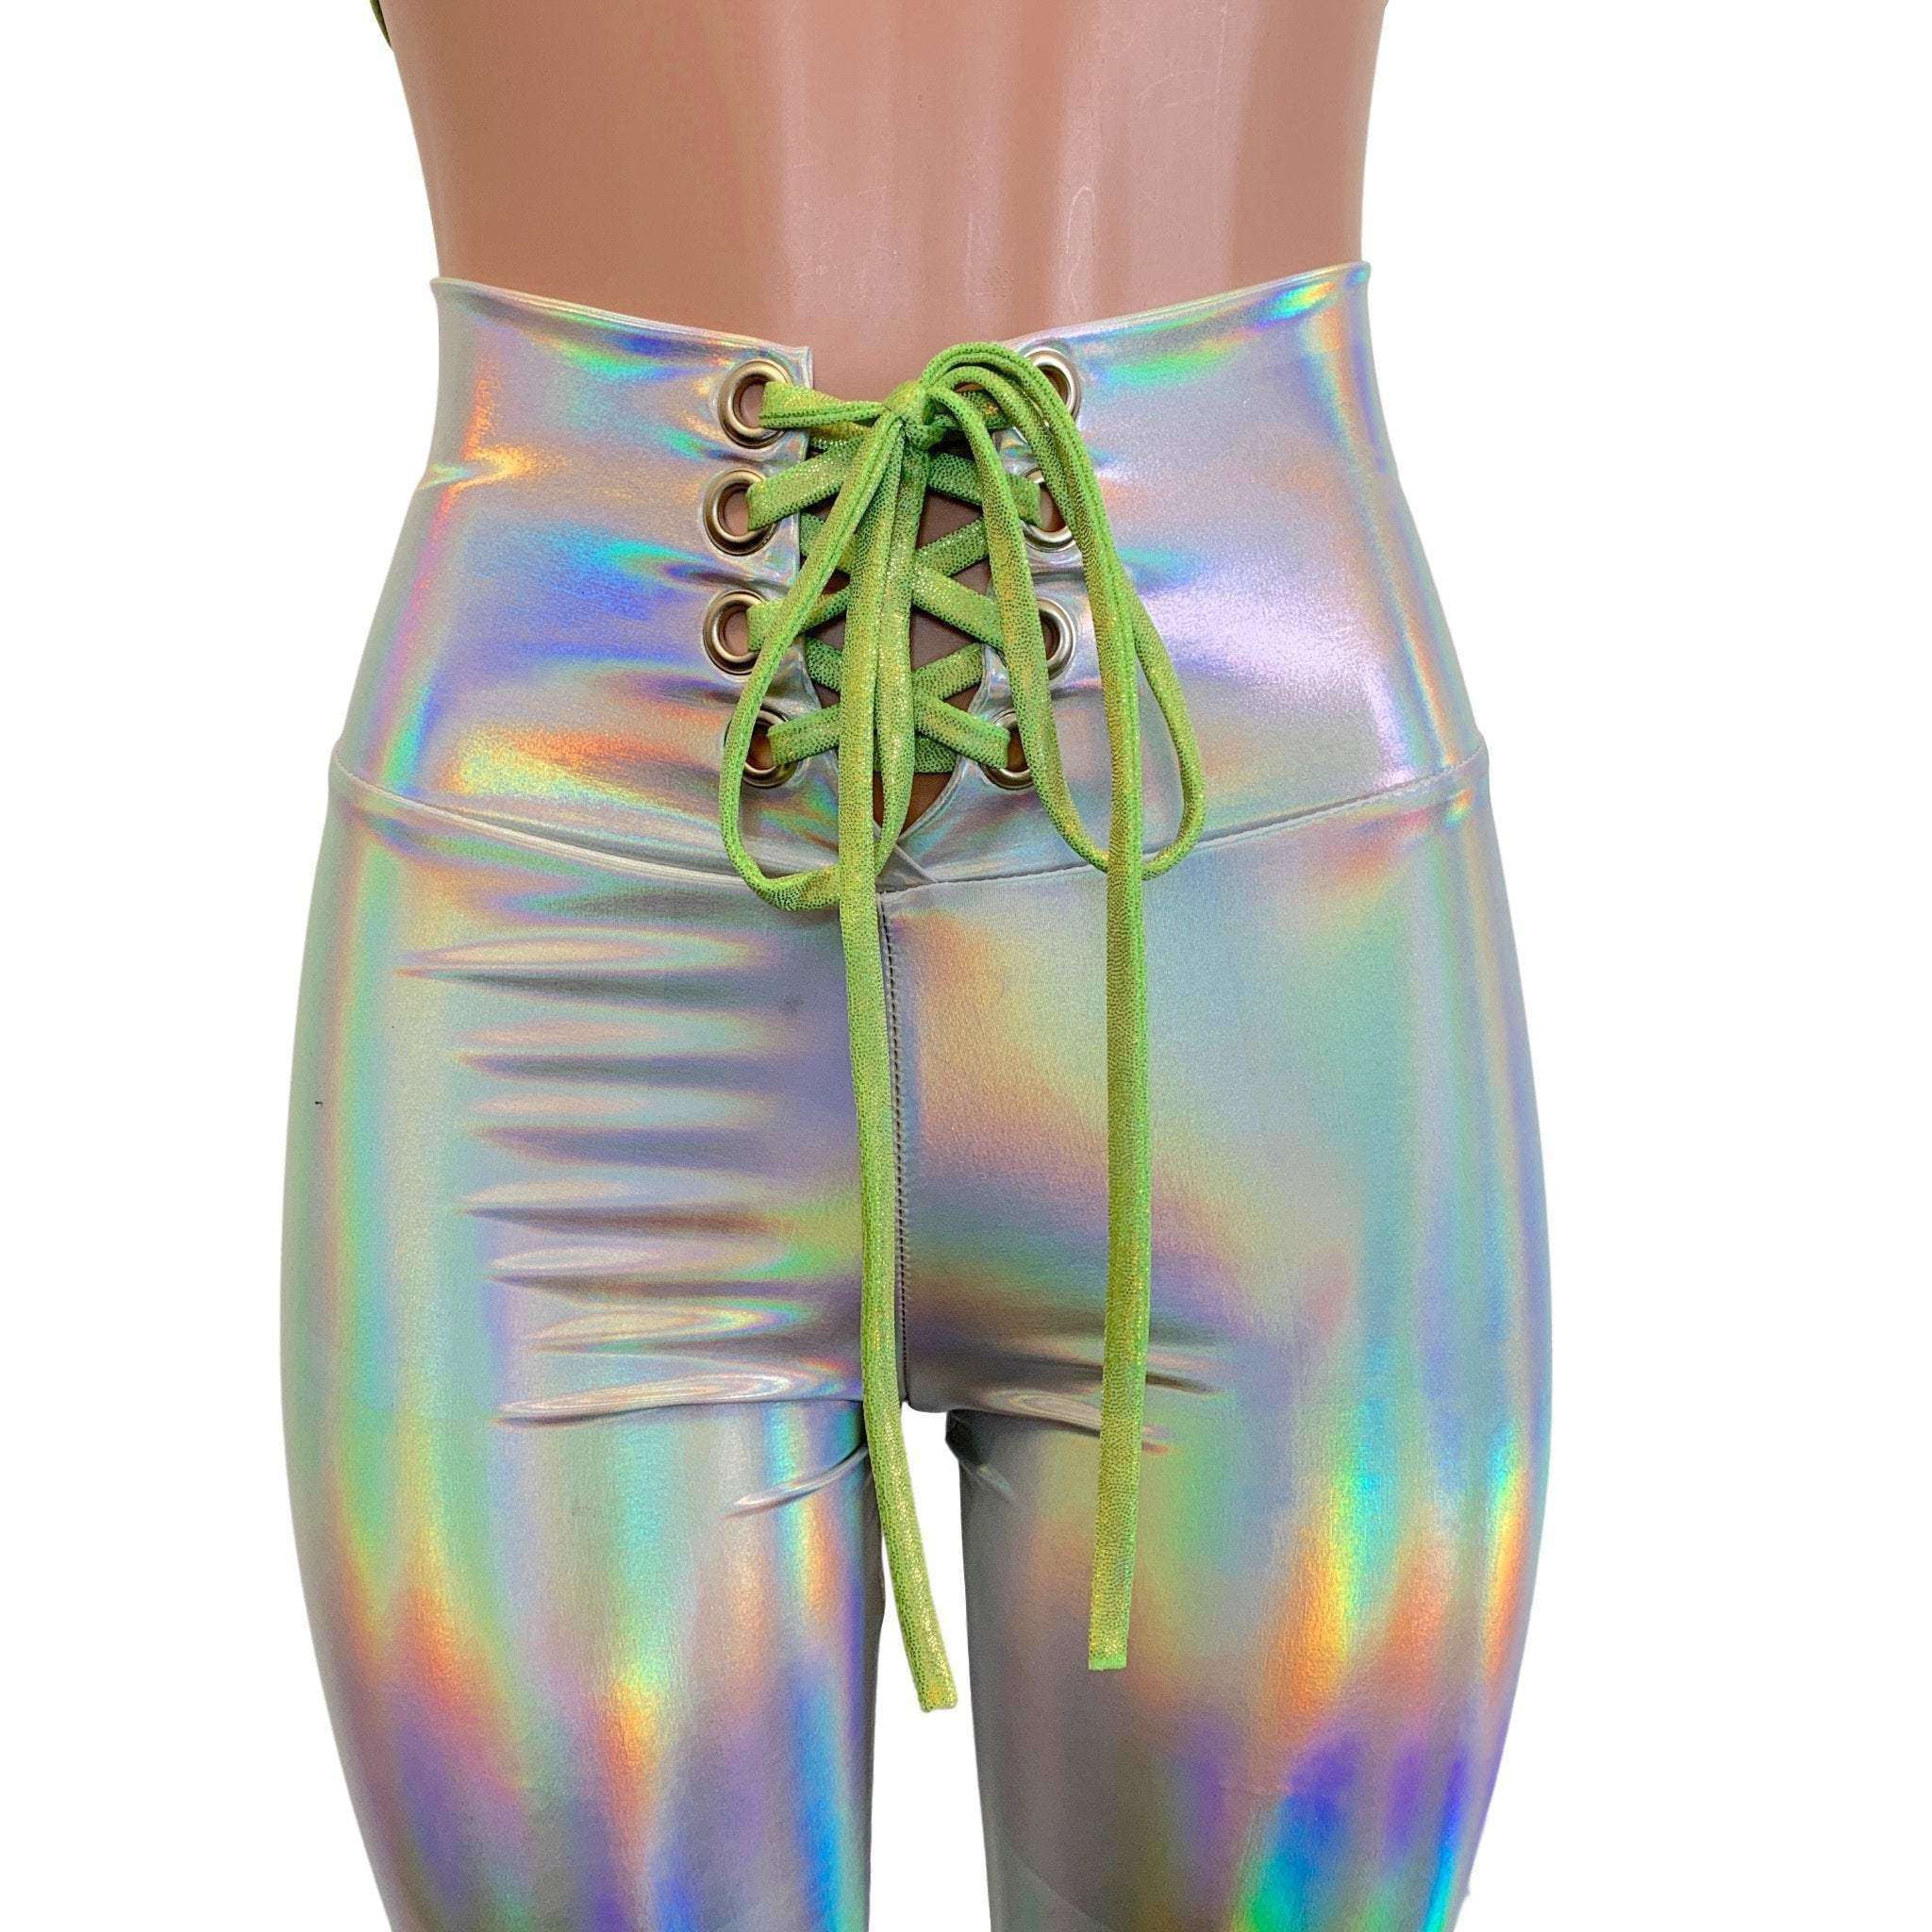 Lace-Up High Waist Leggings - Opal Holographic Iridescent– Peridot Clothing